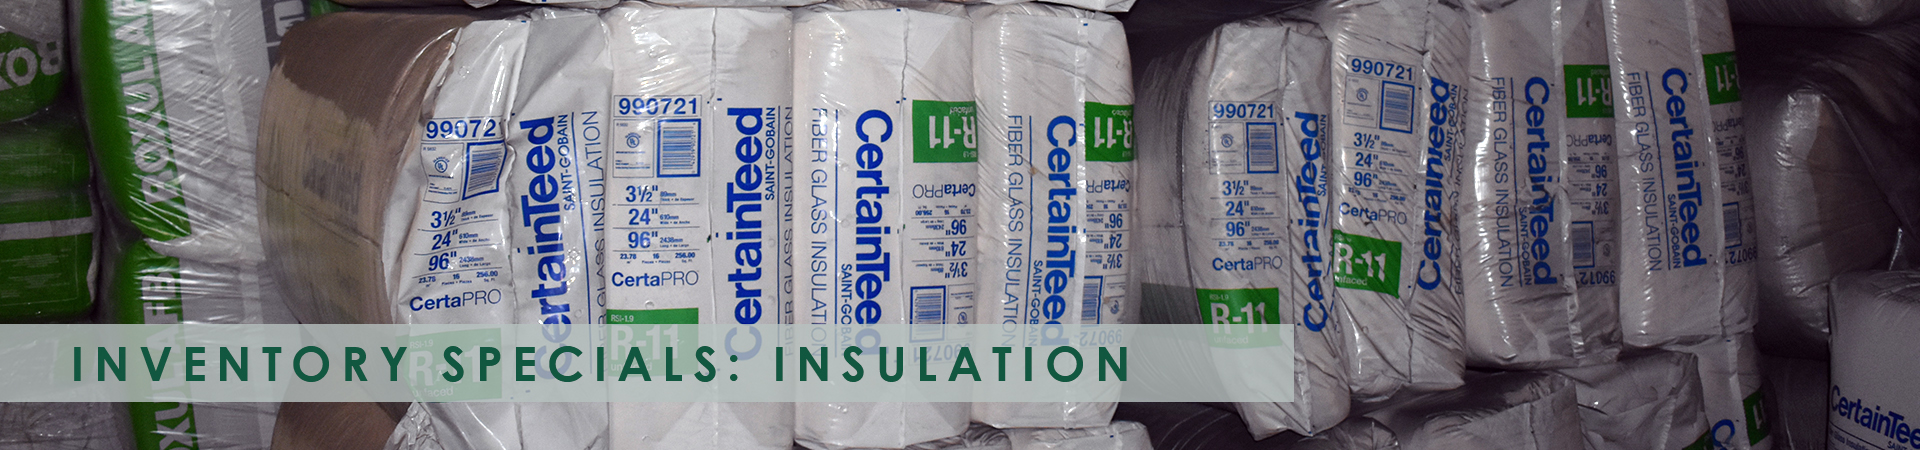 inventory specials insulation page banner